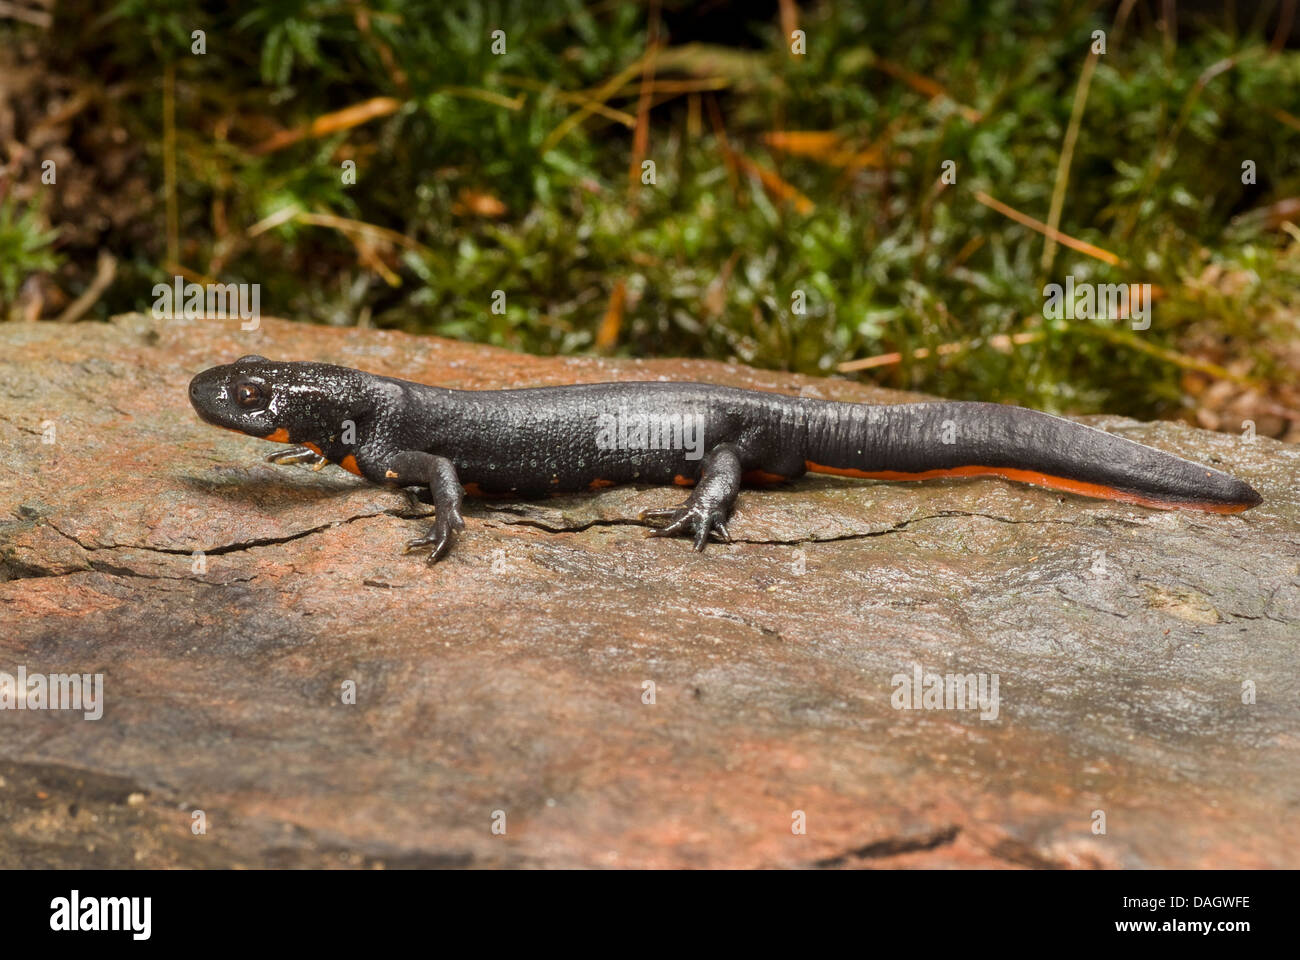 Chinese dwarf newt, Chinese fire bellied newt (Cynops orientalis), on a stone Stock Photo